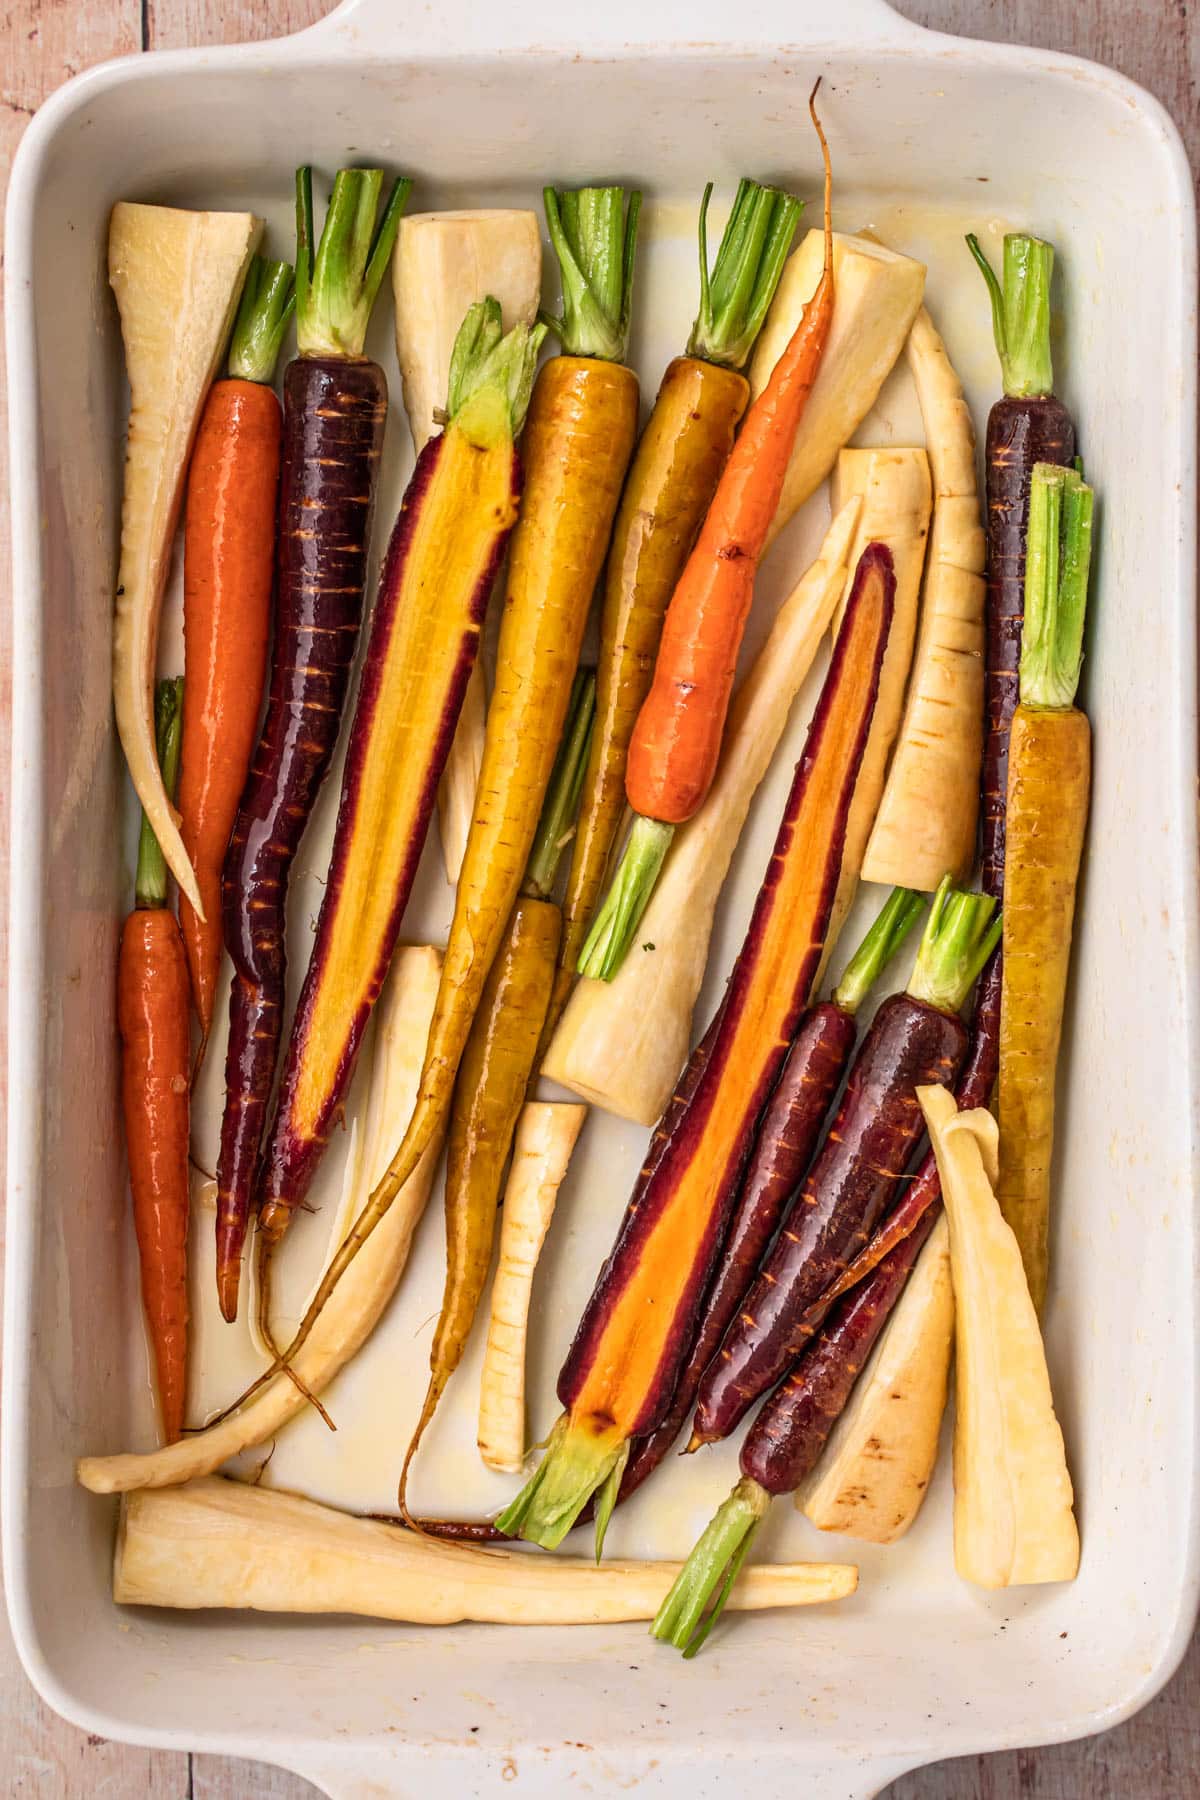 Baby carrots and sliced parsnips spread out in a single layer in a large white baking dish.